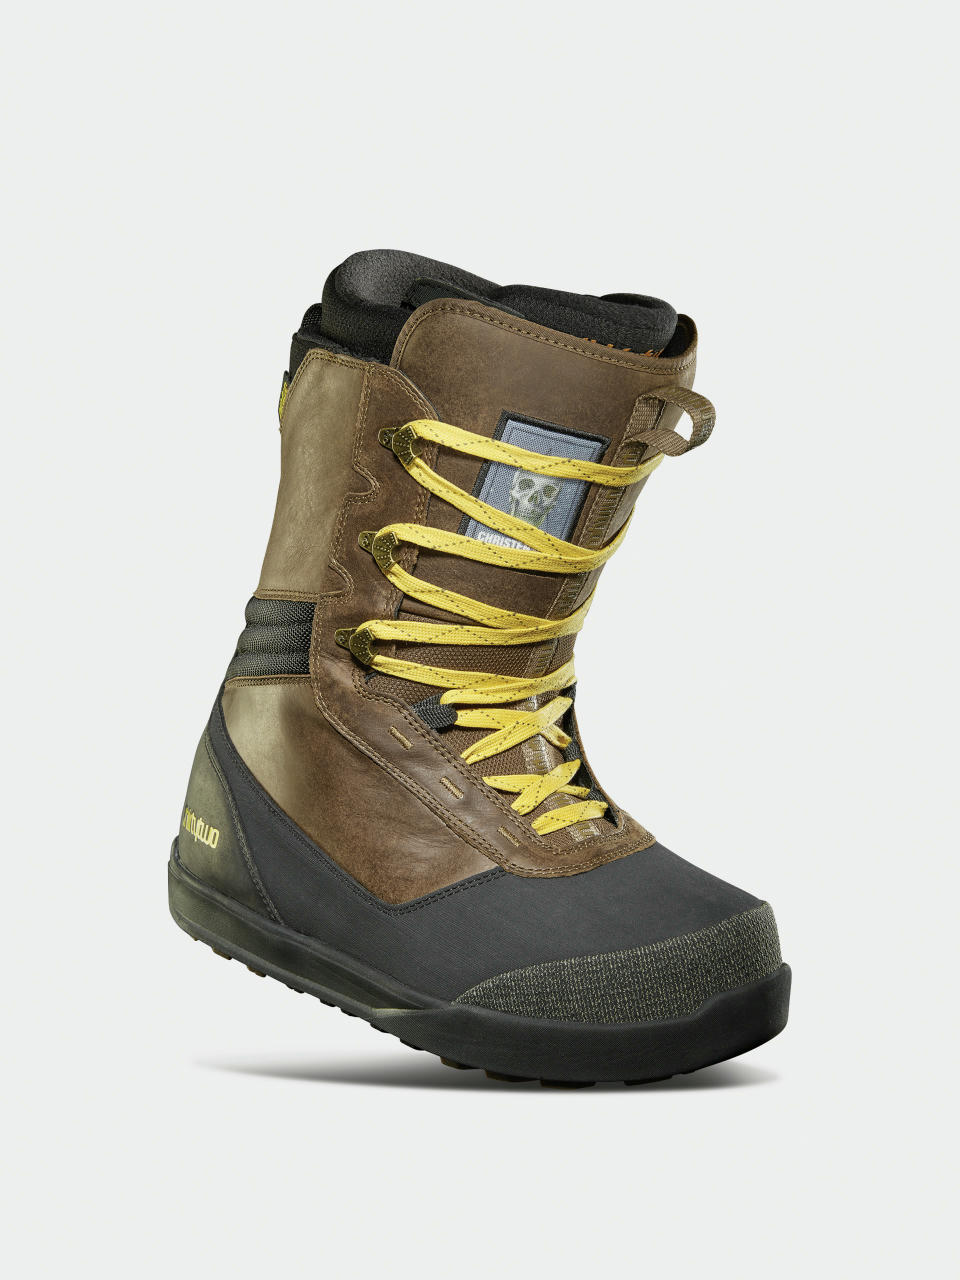 Snowboard boots - Sale